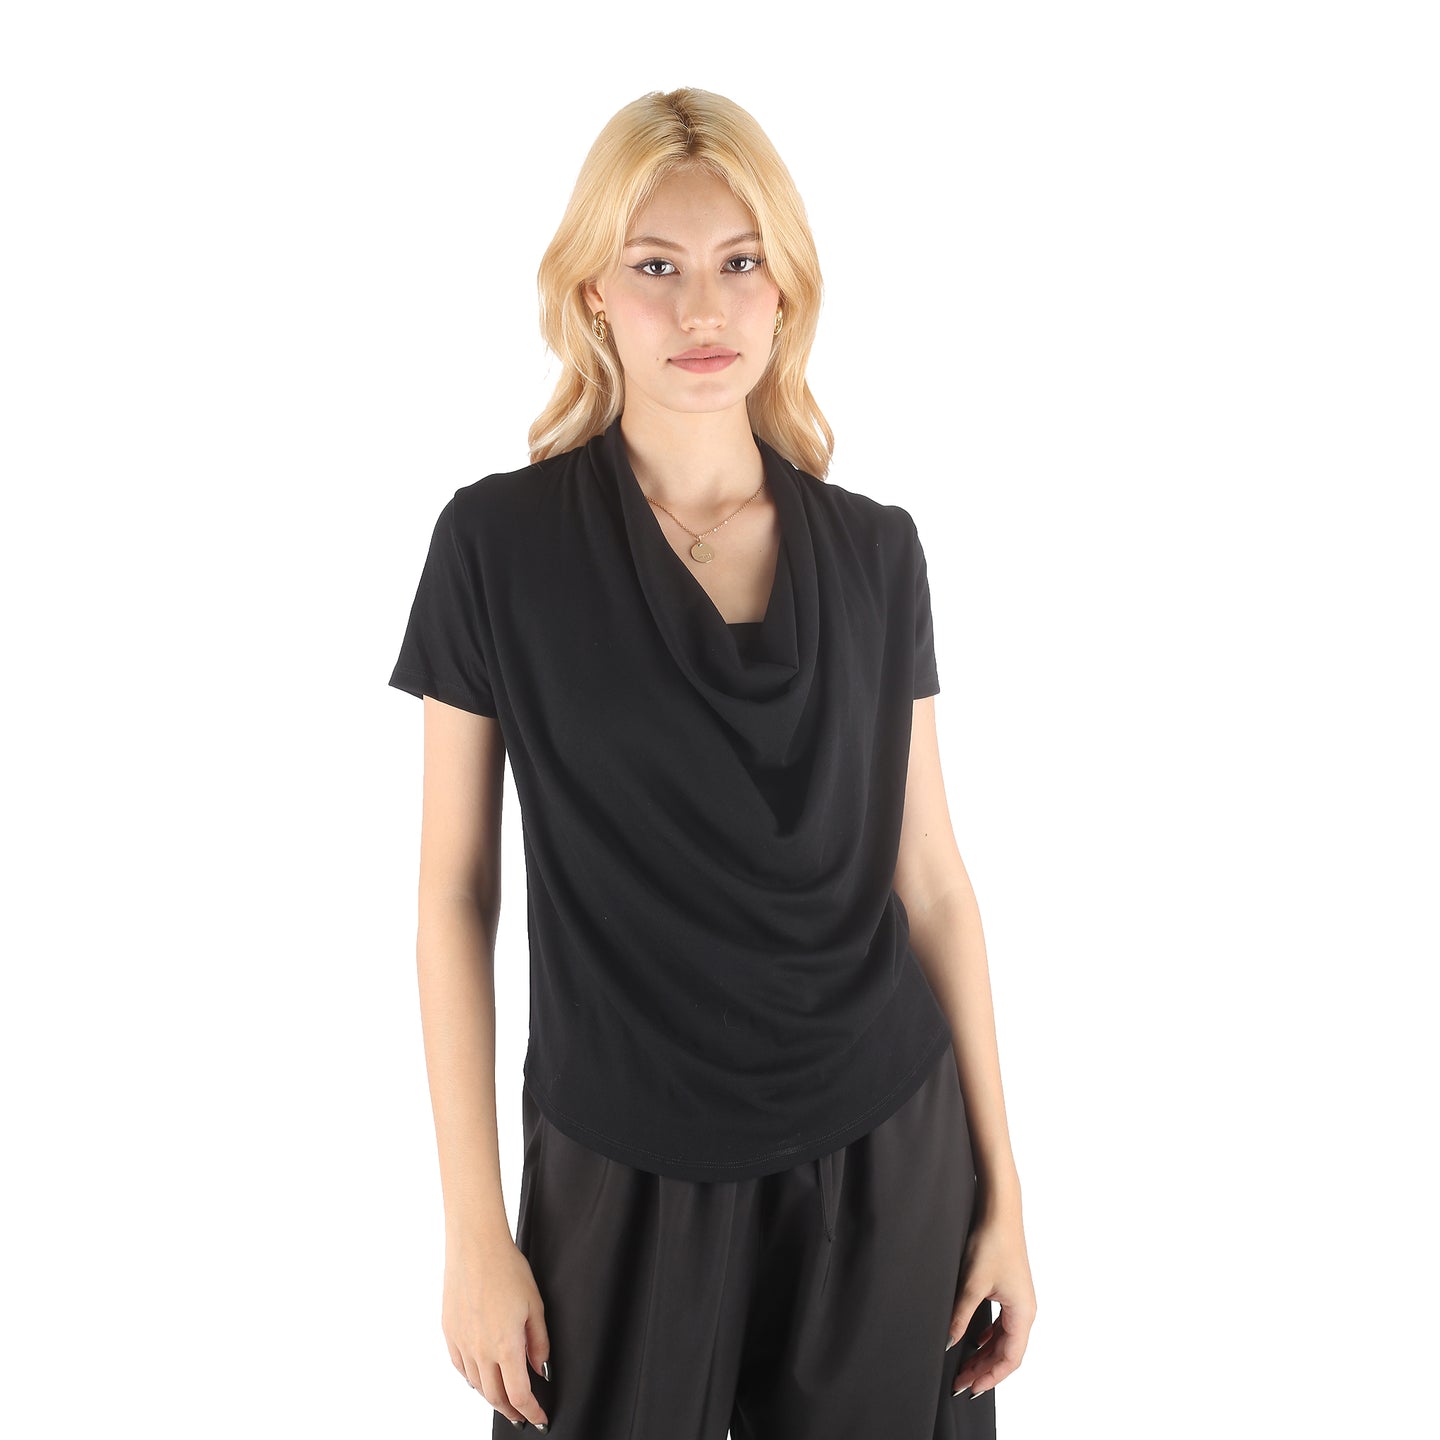 Solid Color Women's T-Shirt in Black SH0204 070000 10